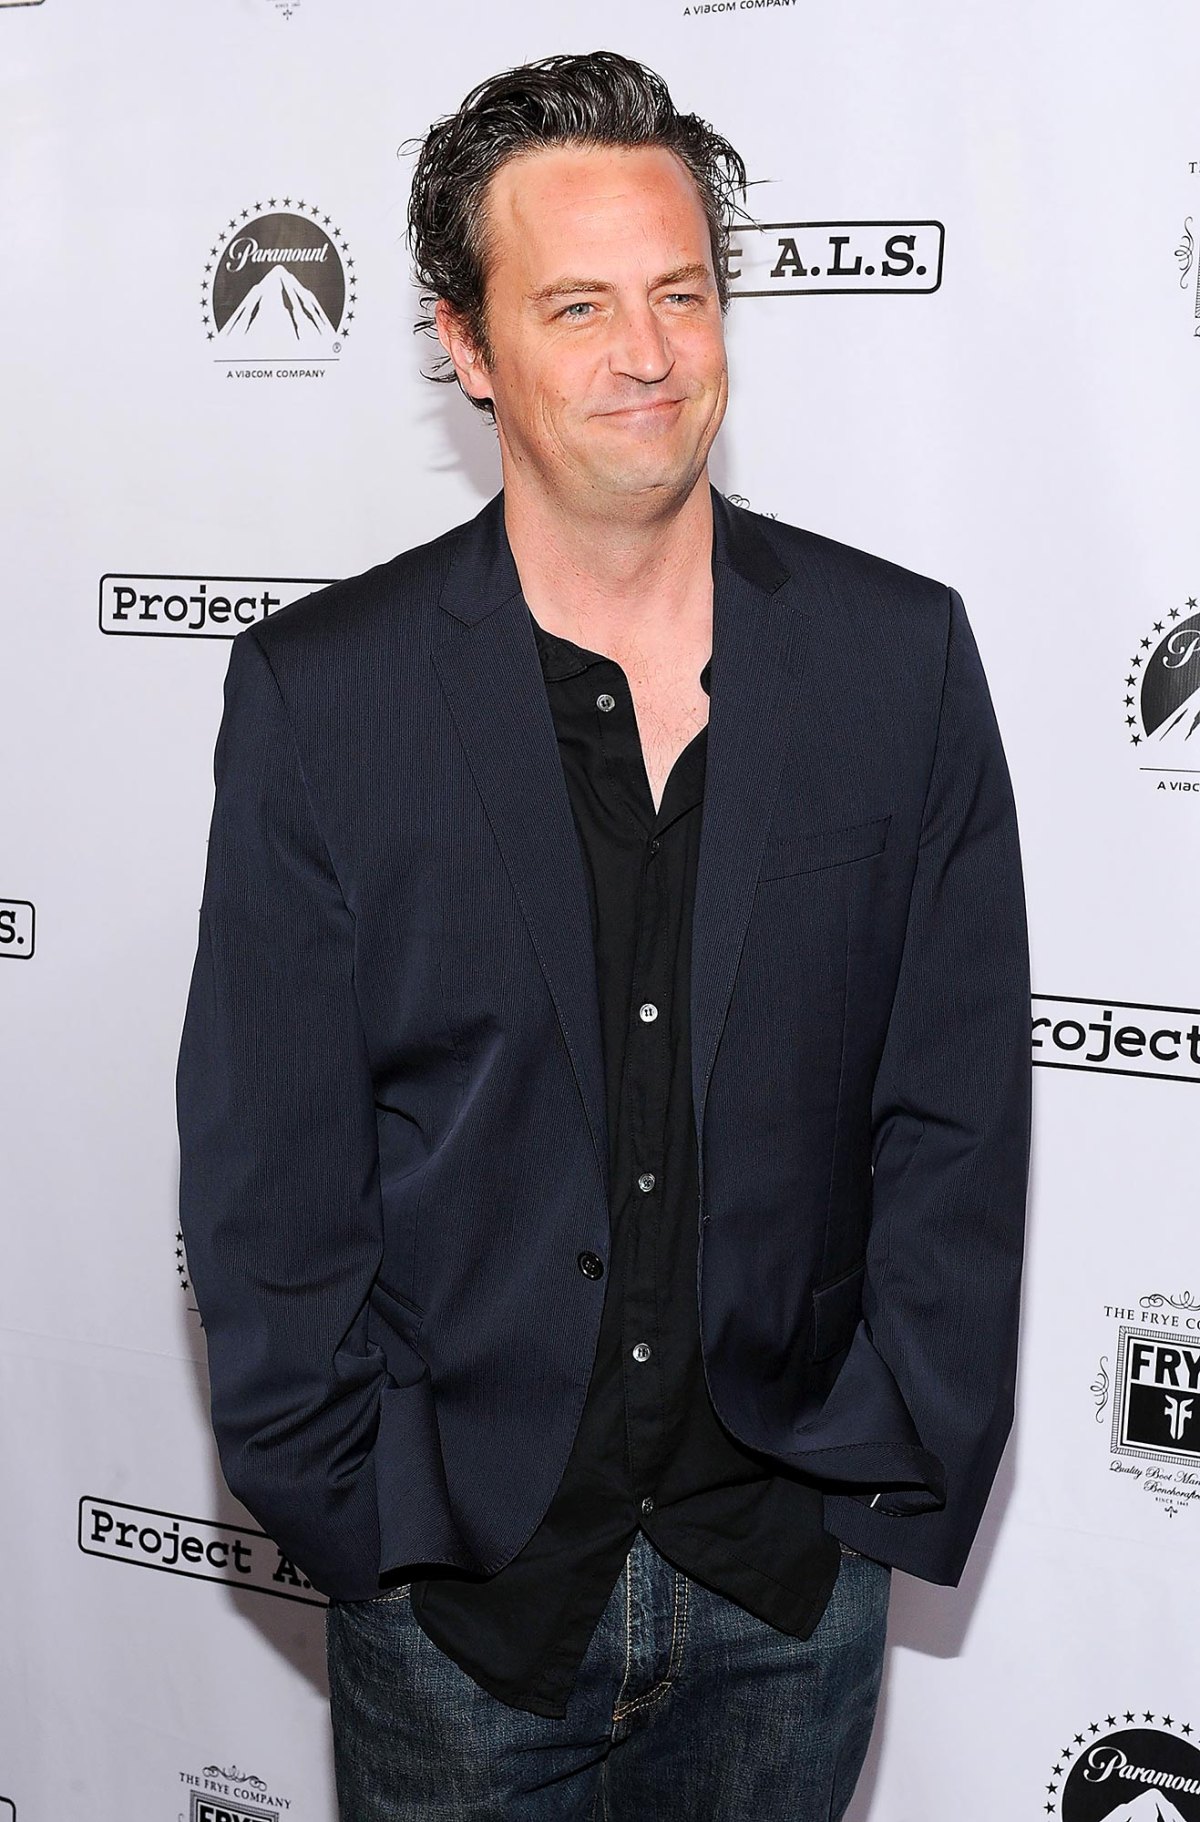 Matthew Perry's Death Being Investigated By Law Enforcement: Reports